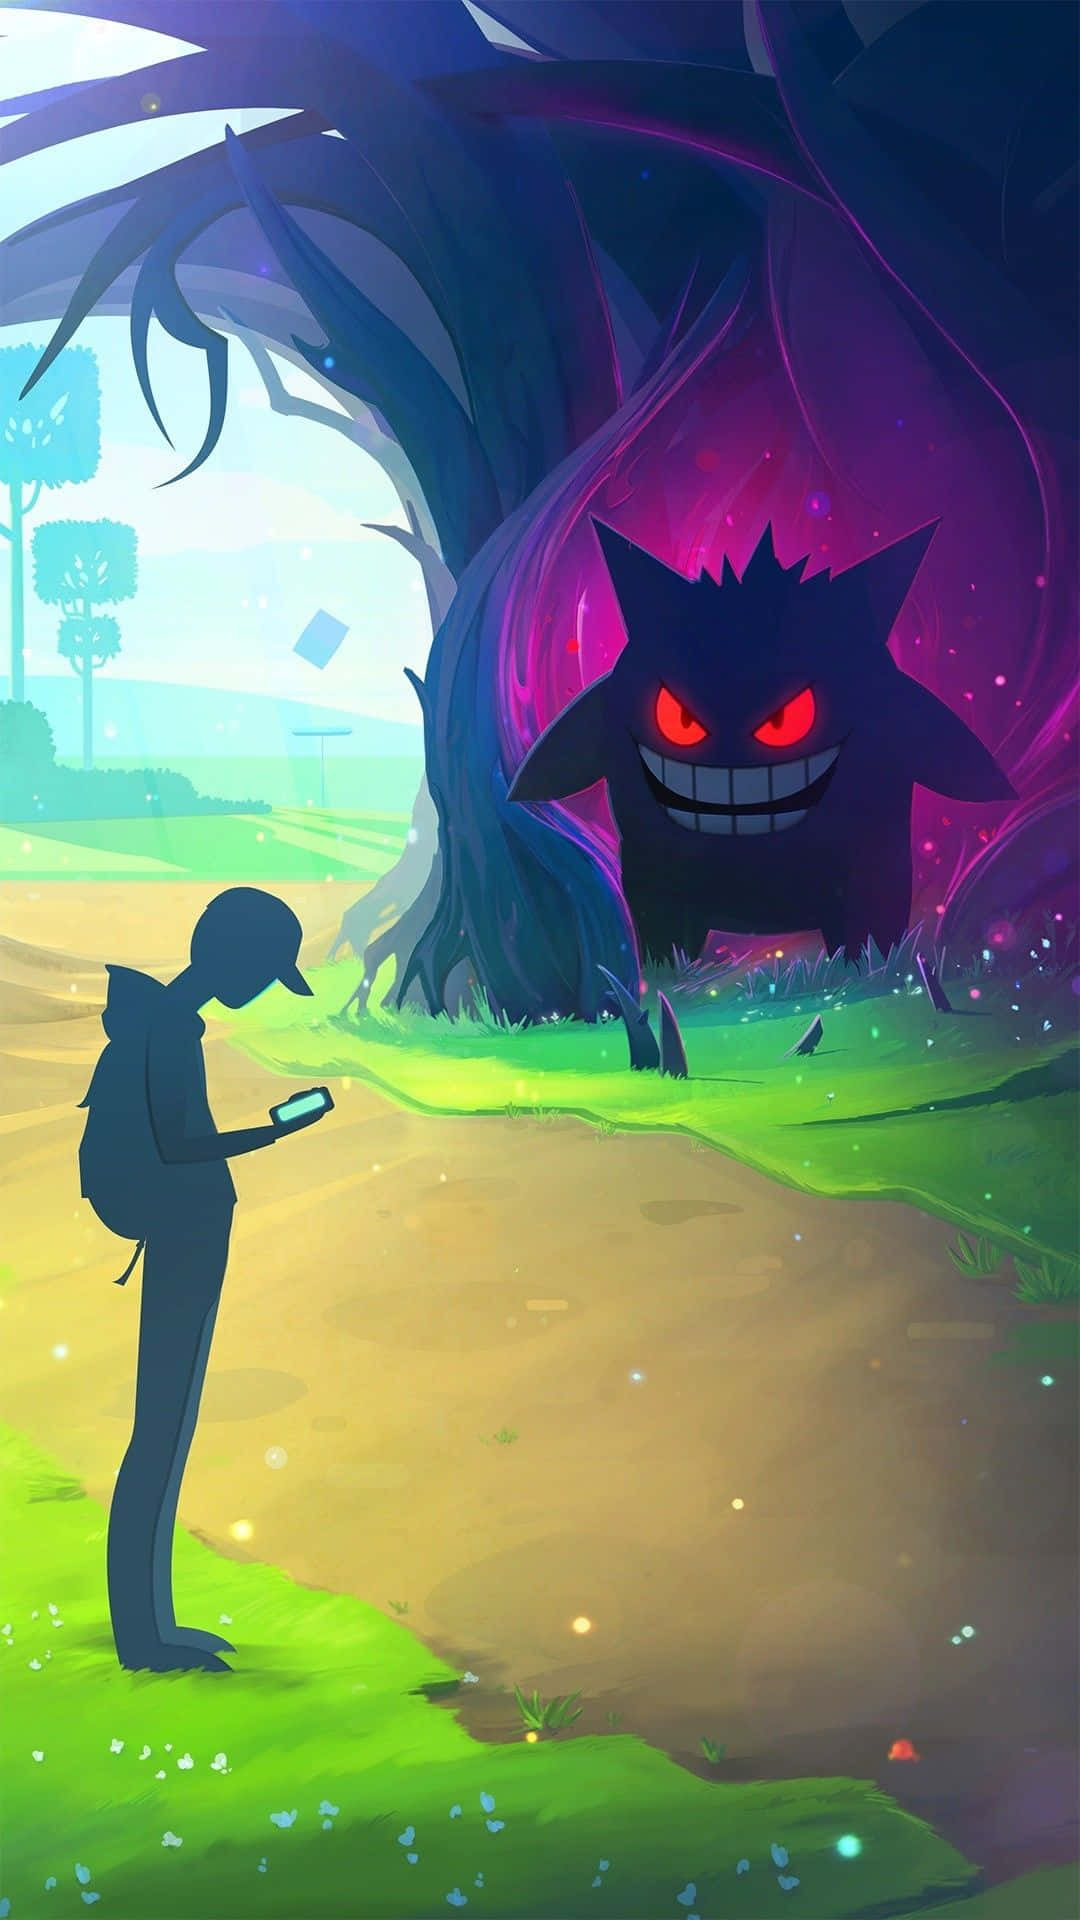 Pokemon Go Gengar Is A Popular Choice For Computer Or Mobile Wallpaper. Wallpaper